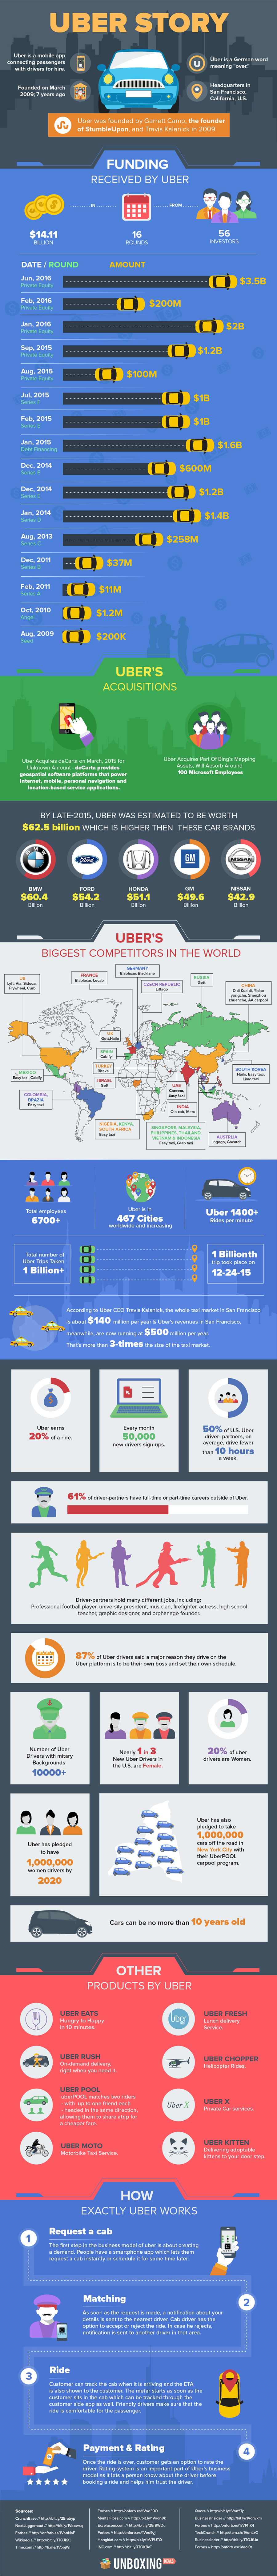 All About Uber - Uber: How it is Doing Better than Most Global Automobile Giants [Infographic]